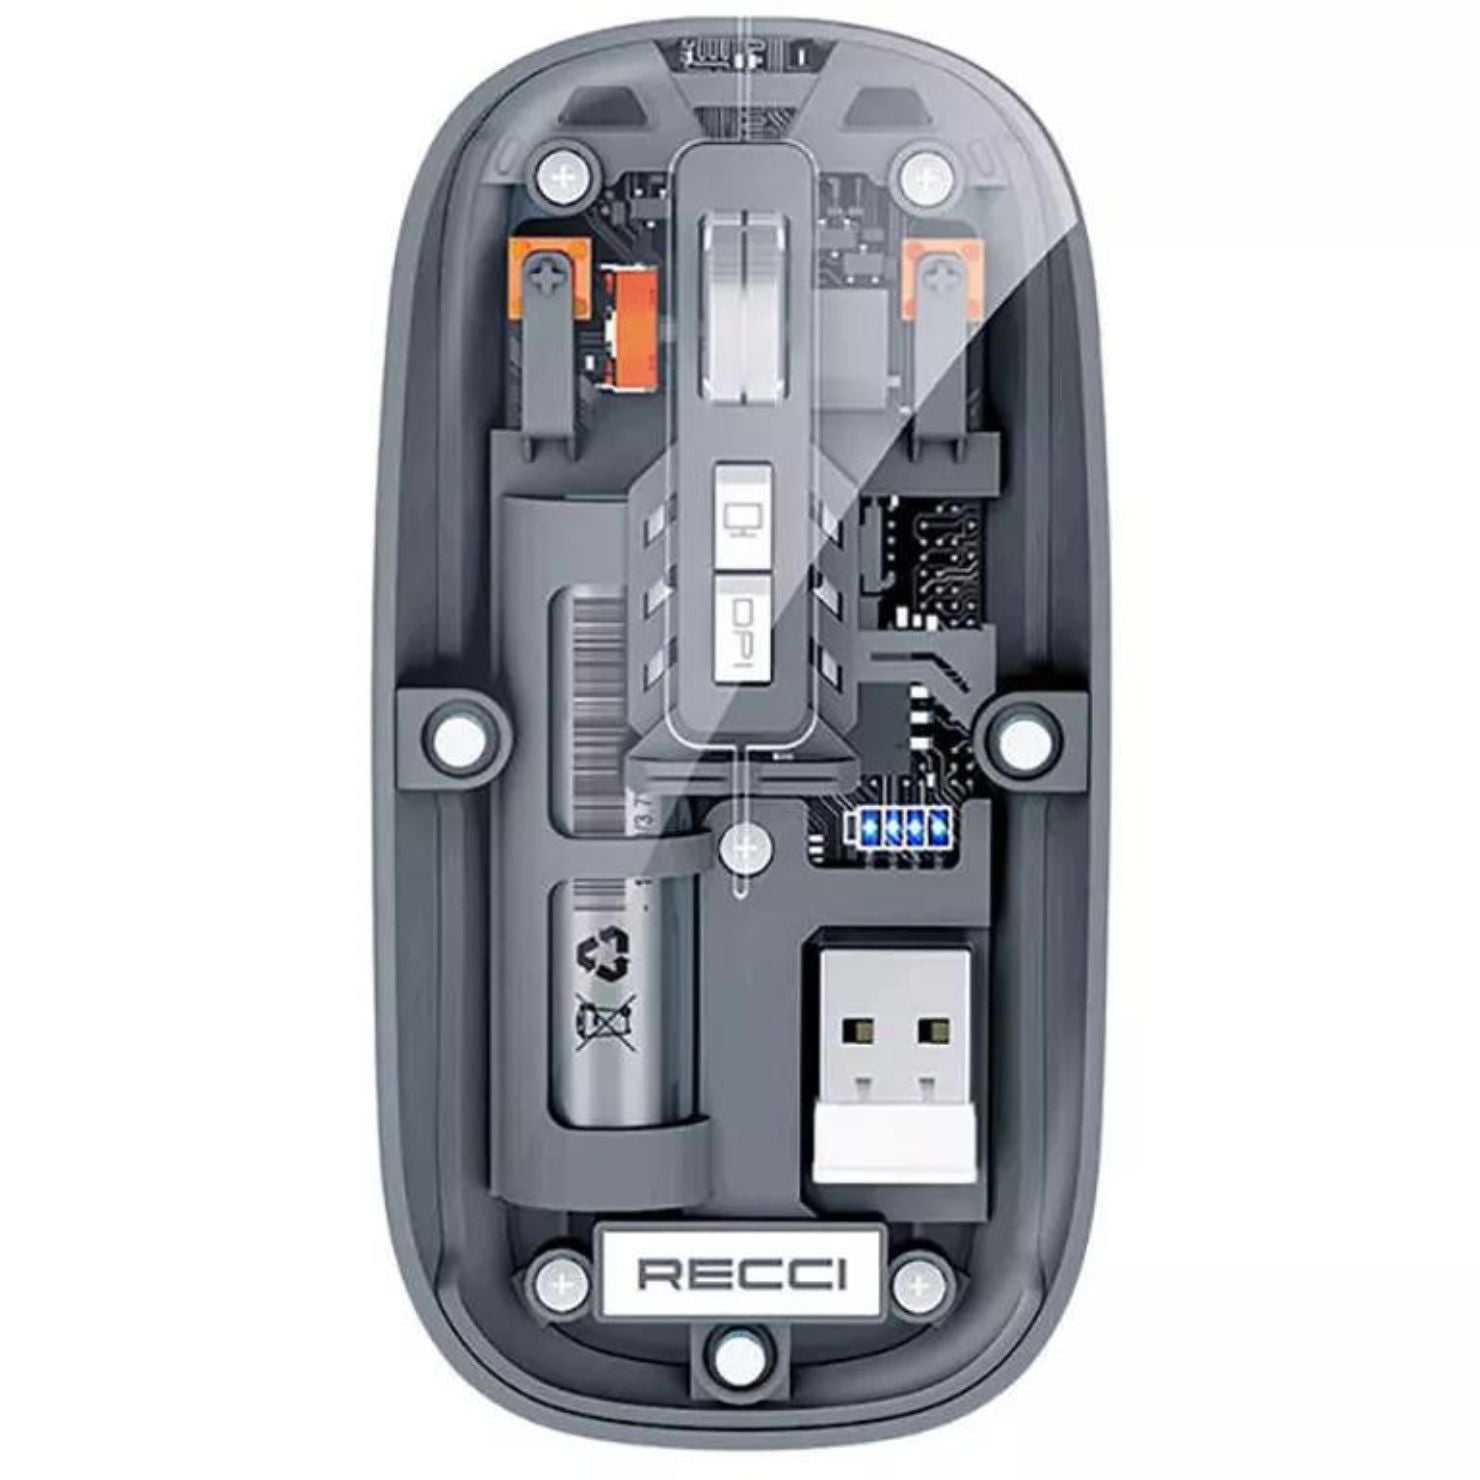 Space Capsule Wireless Mouse Recci RCS-M01 Three store